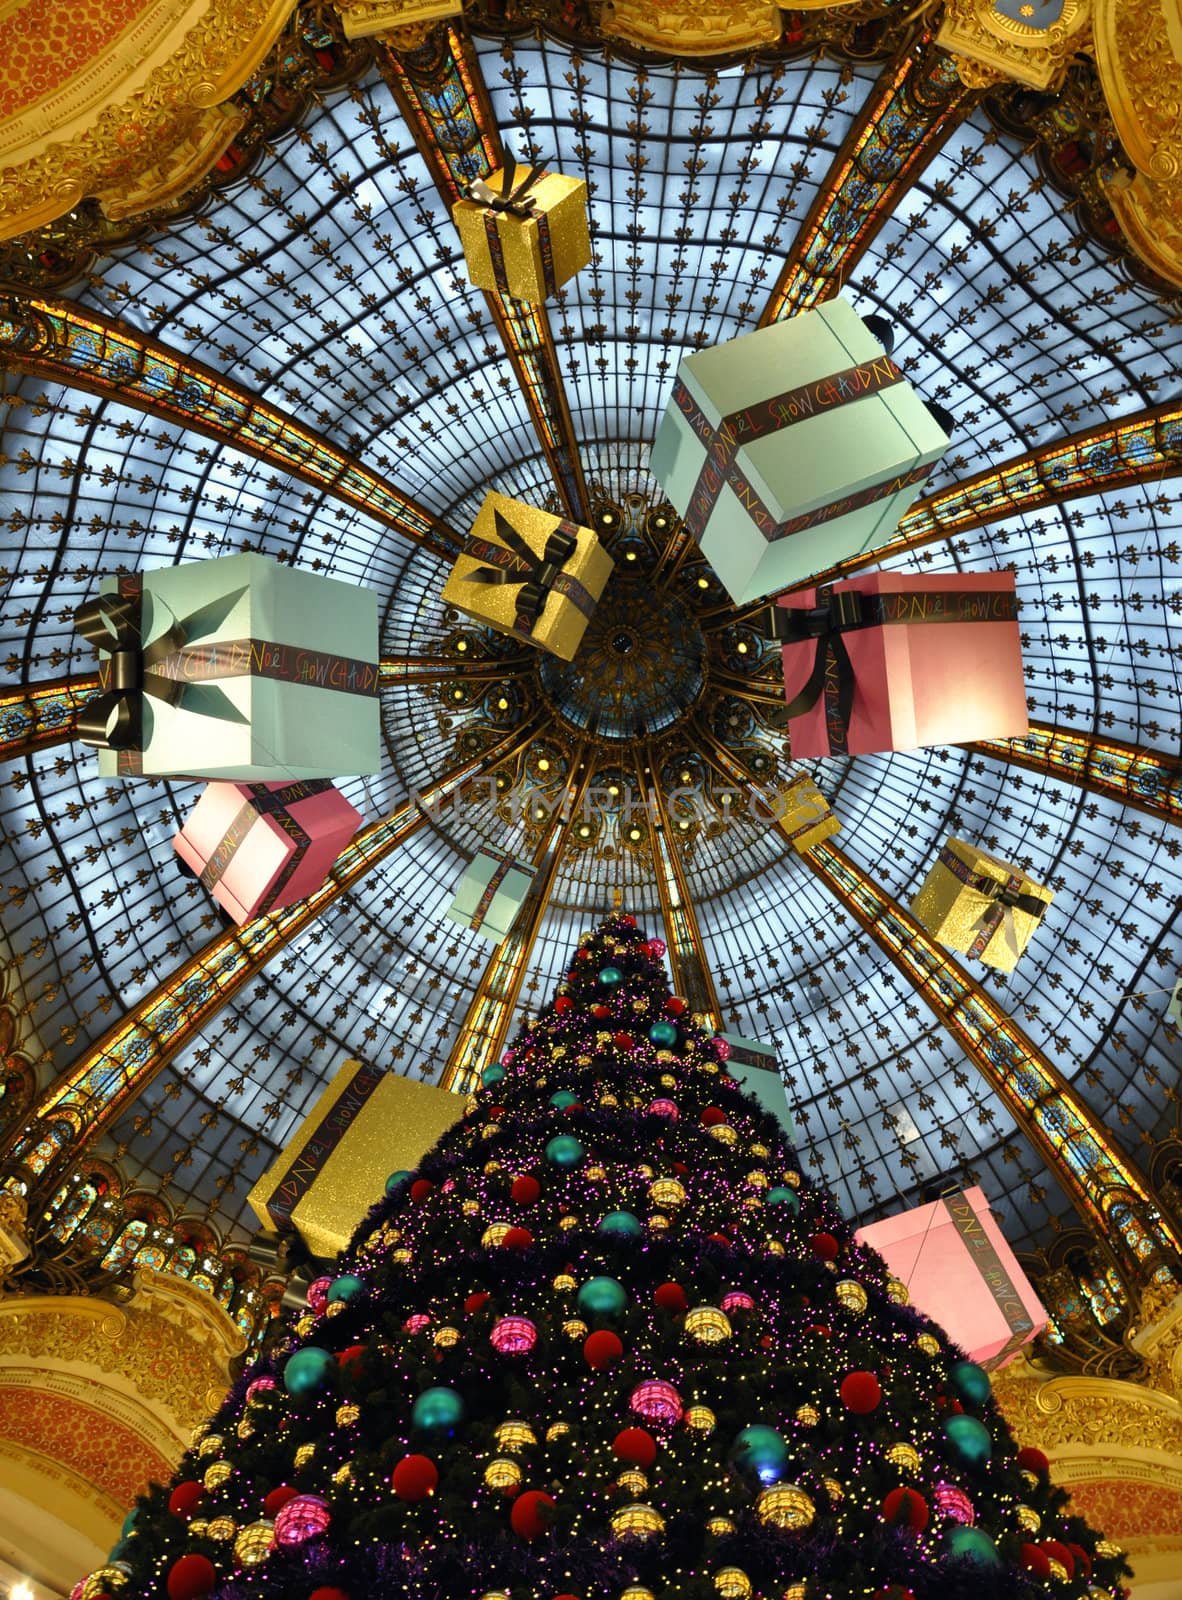 Galeries Lafayette in christmas. by jmffotos